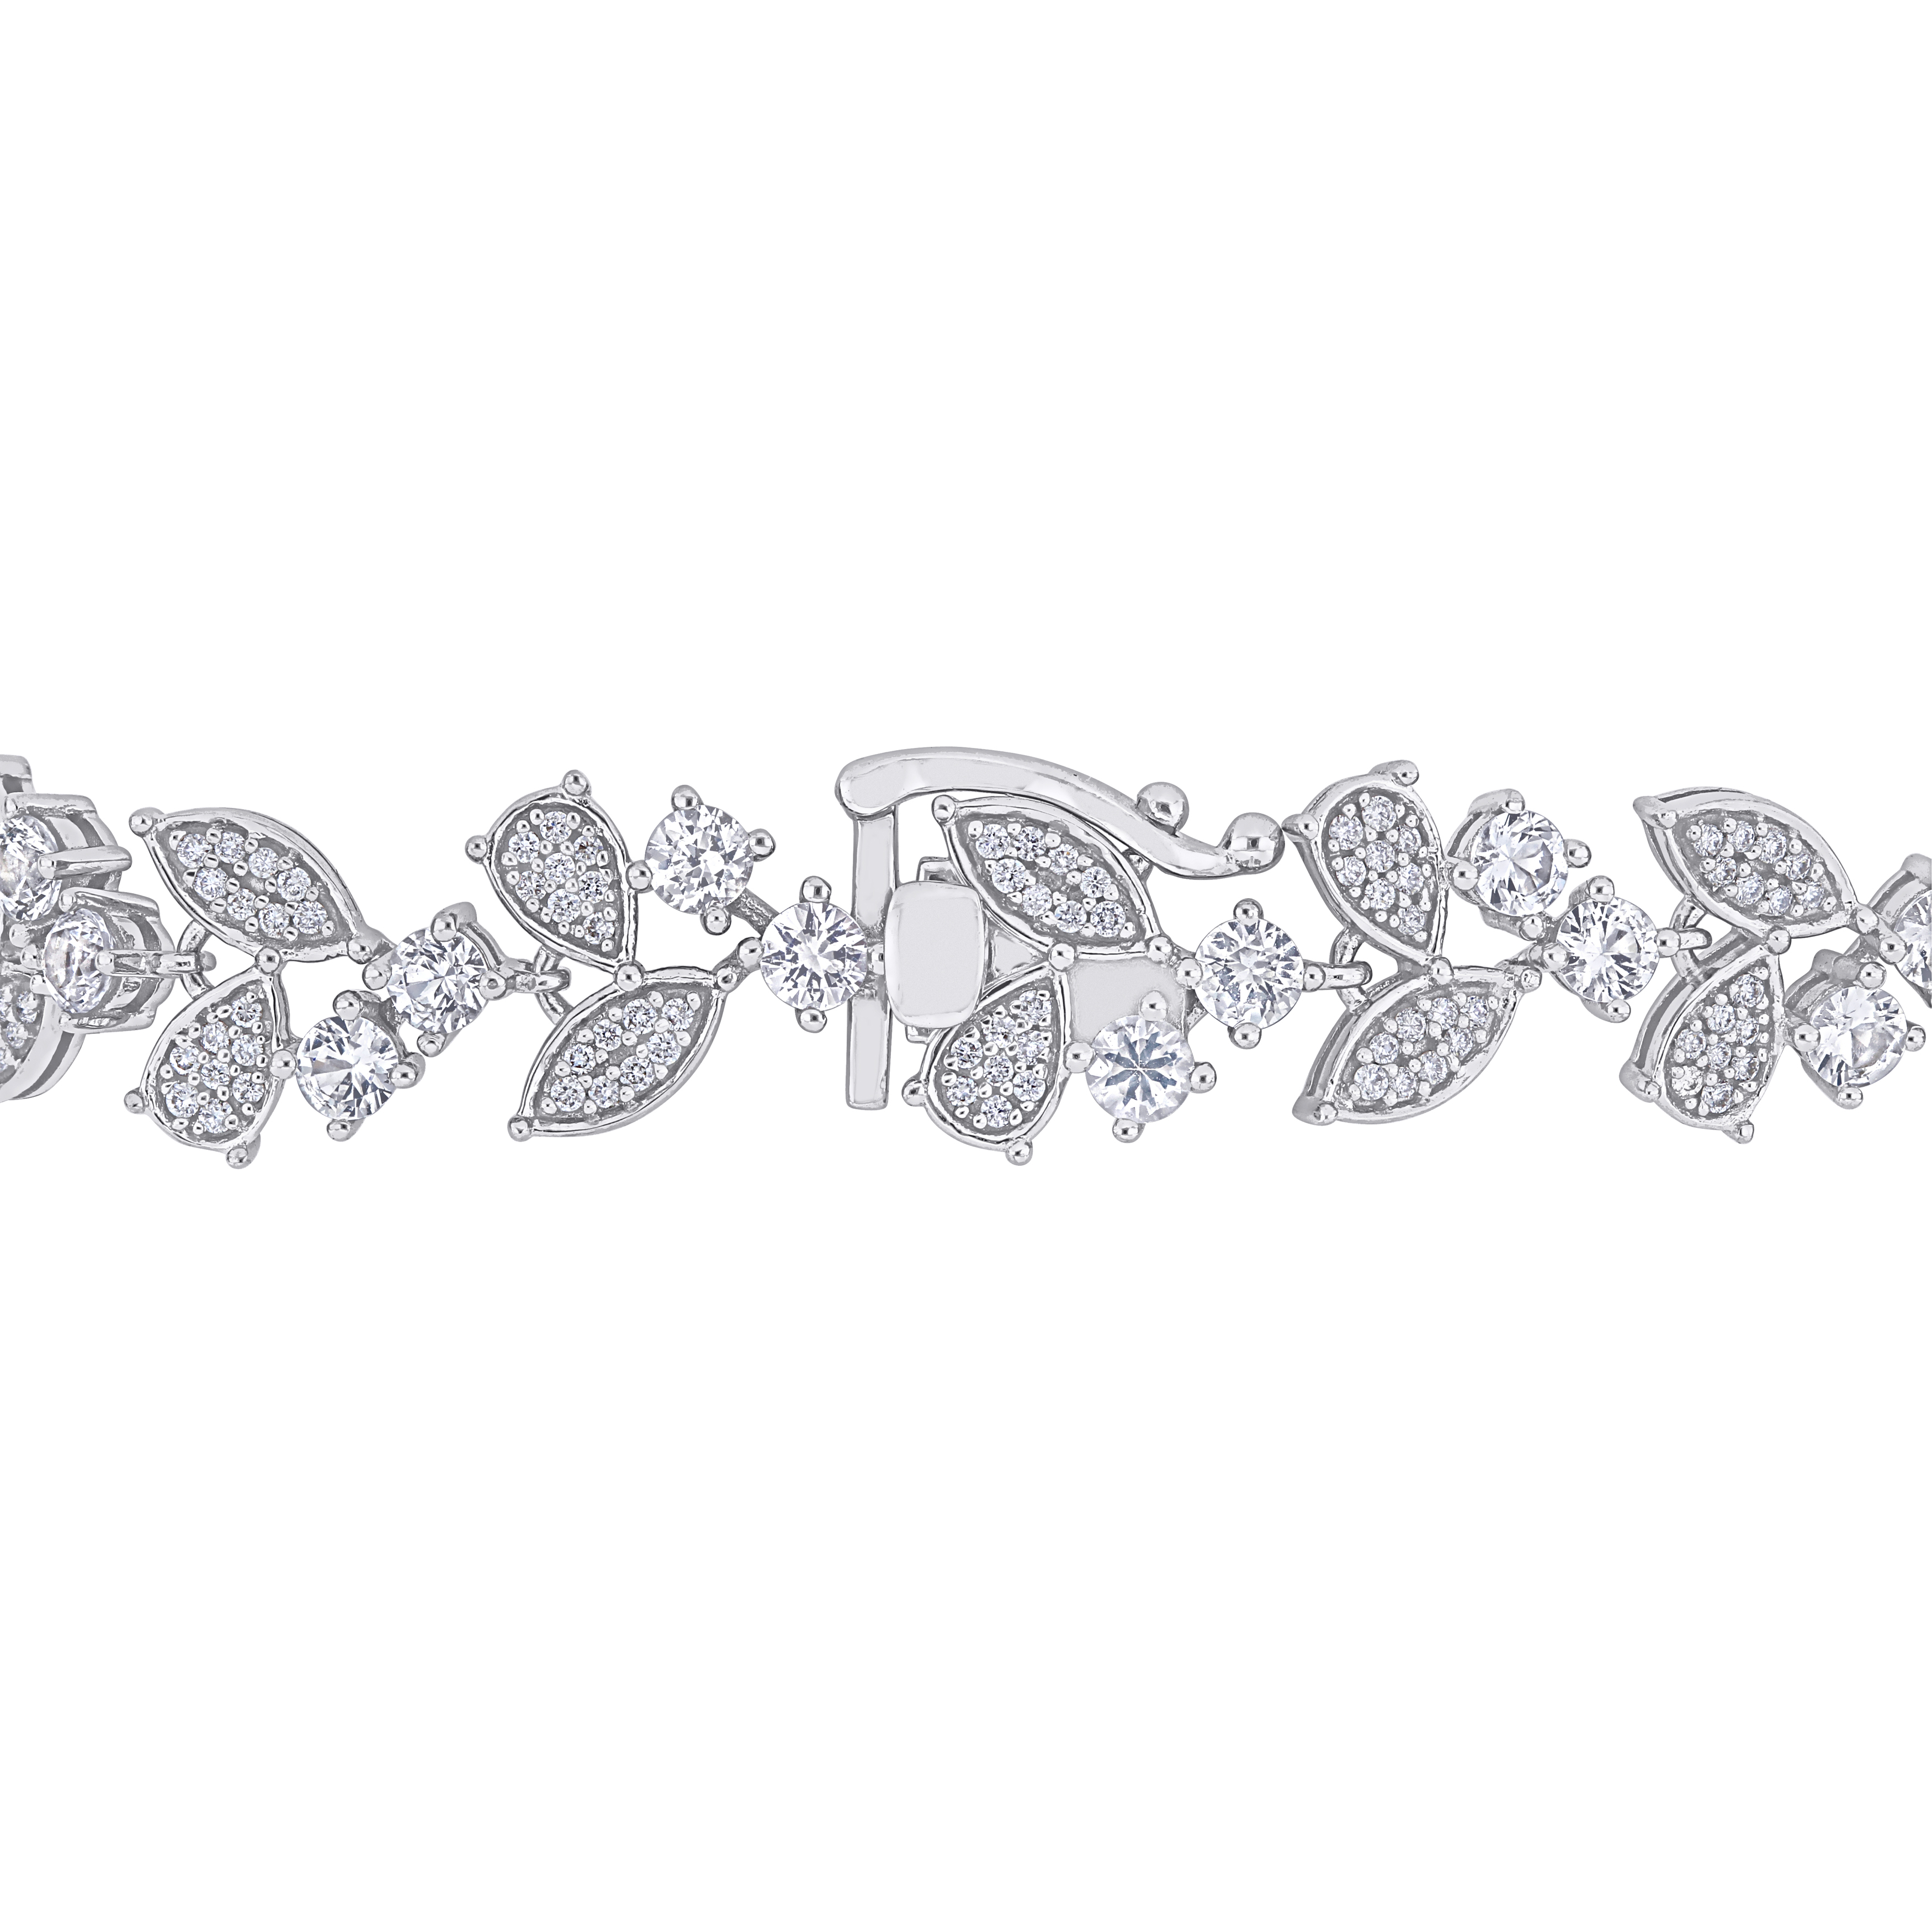 5 CT TGW White Sapphire and 1 CT TW Diamond Bracelet in 10k White Gold - 7.25 in.